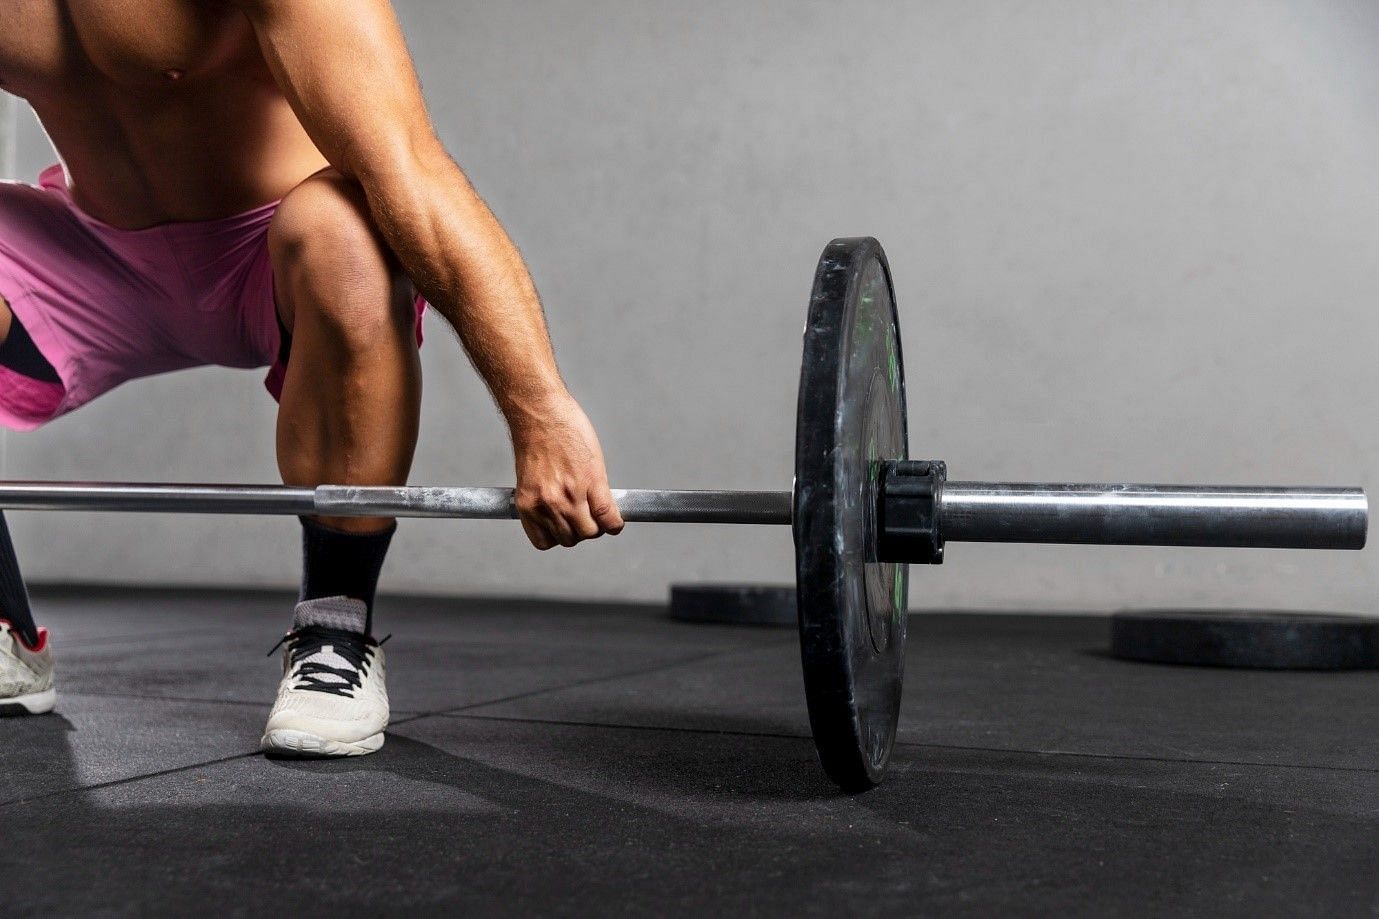 It is advised to keep your upper back straight and flat during barbell row exercise. (image by freepik on freepik)